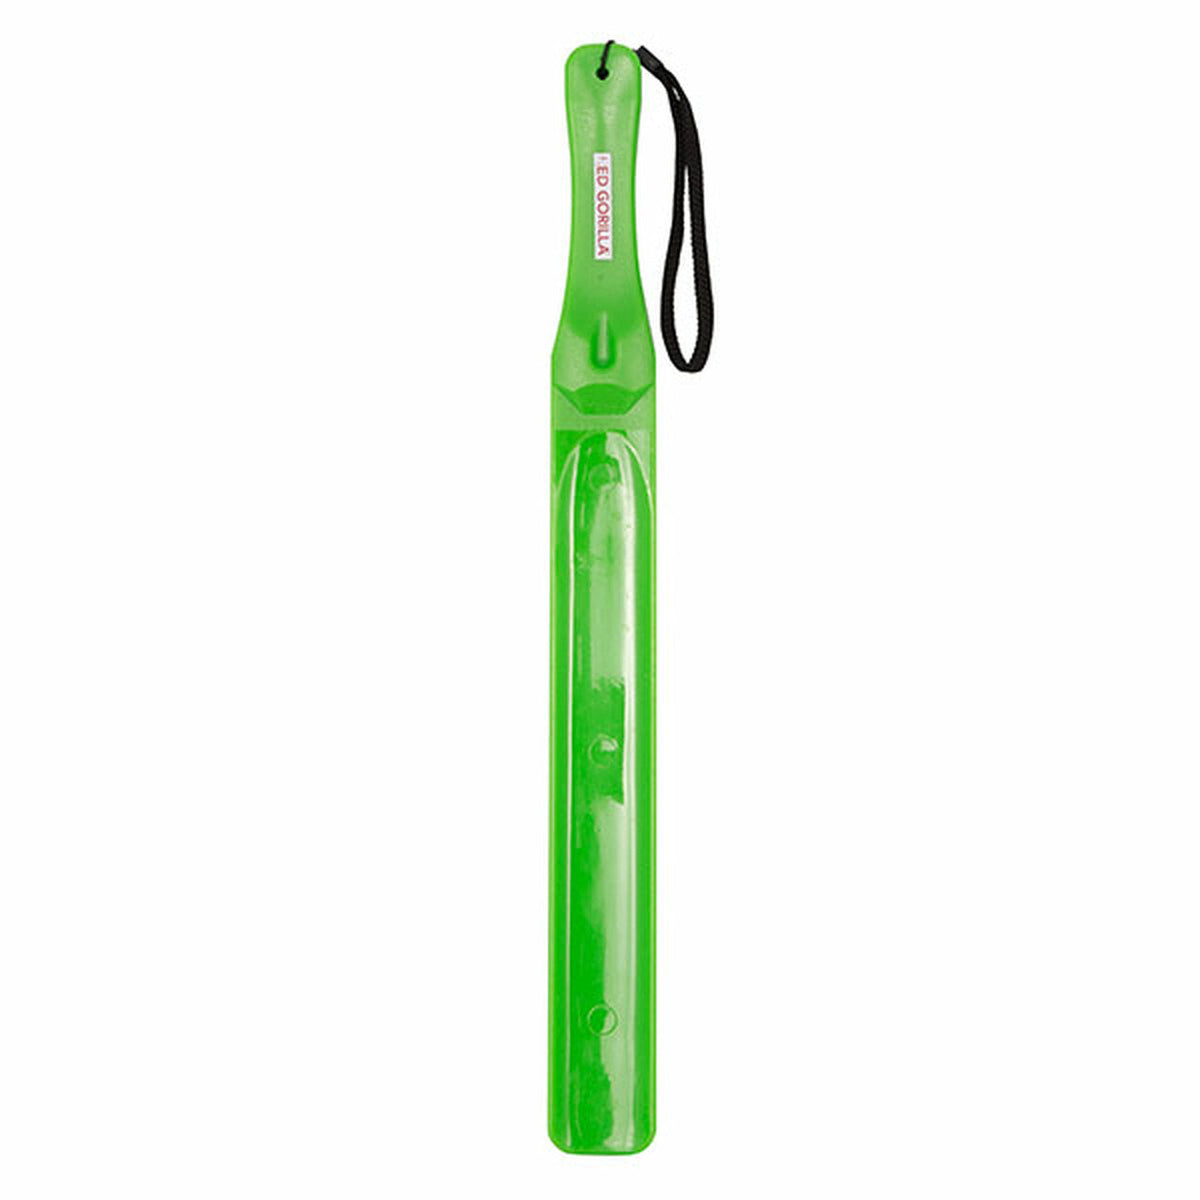 Green plastic feed stirrer, narrowed at the handle with black hand loop.